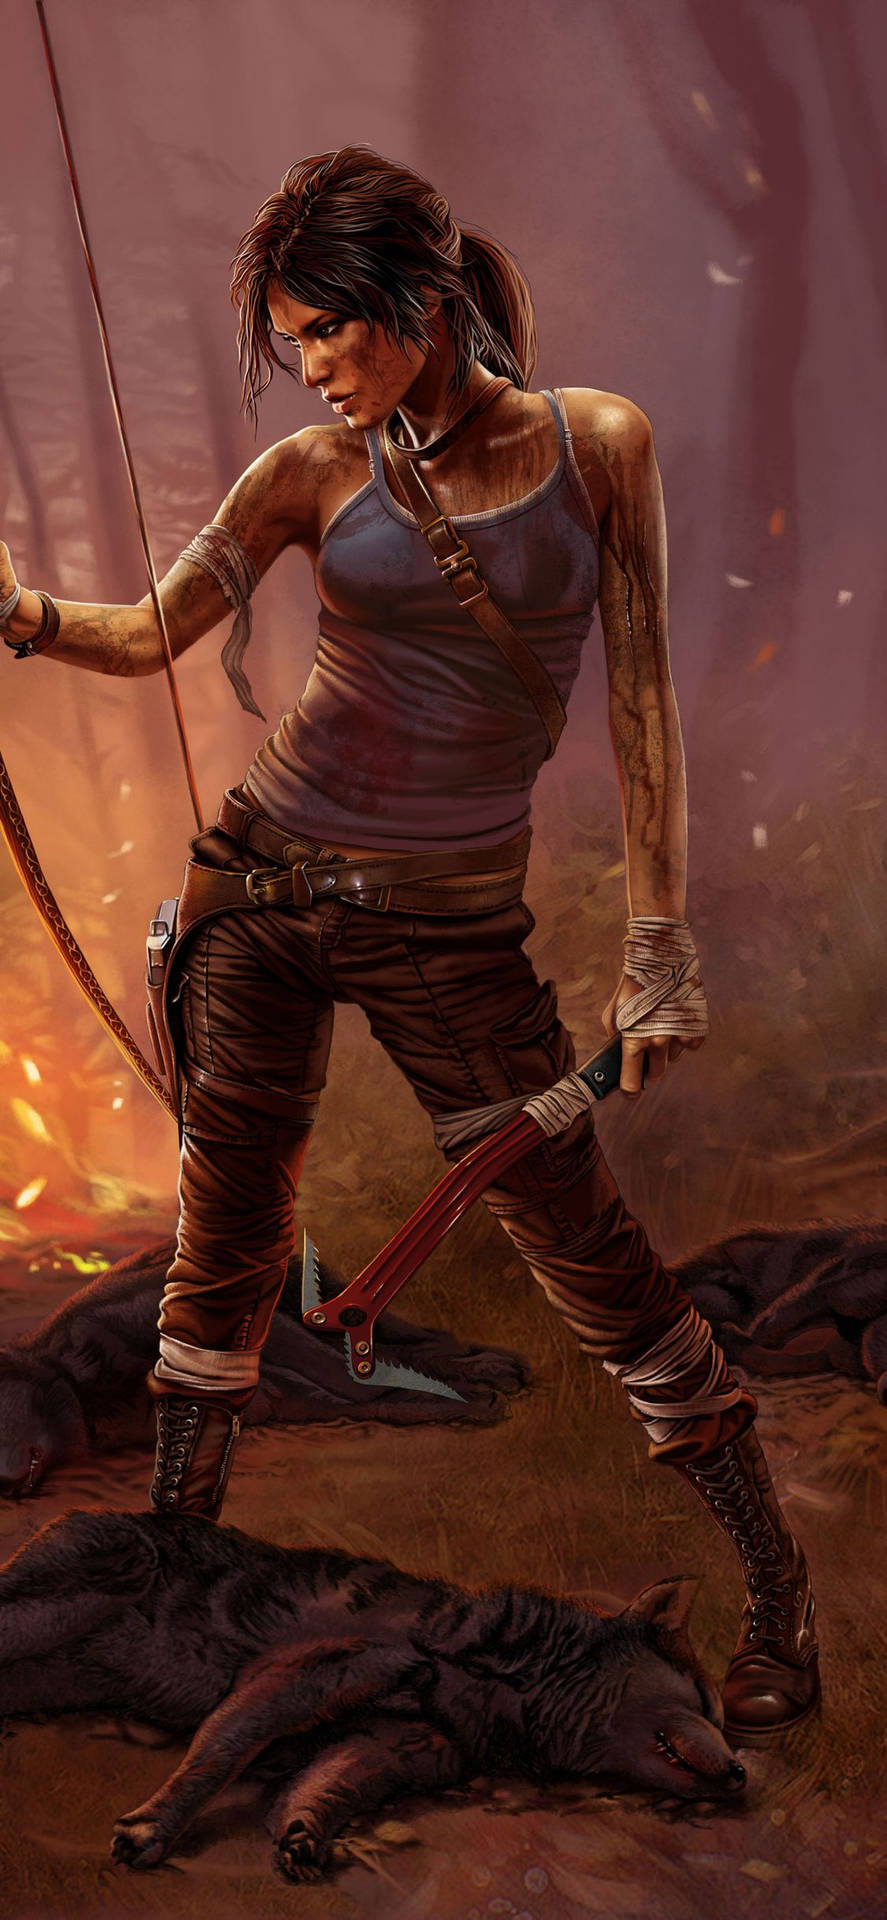 Enjoy the thrill of being Lara Croft on your iPhone! Wallpaper